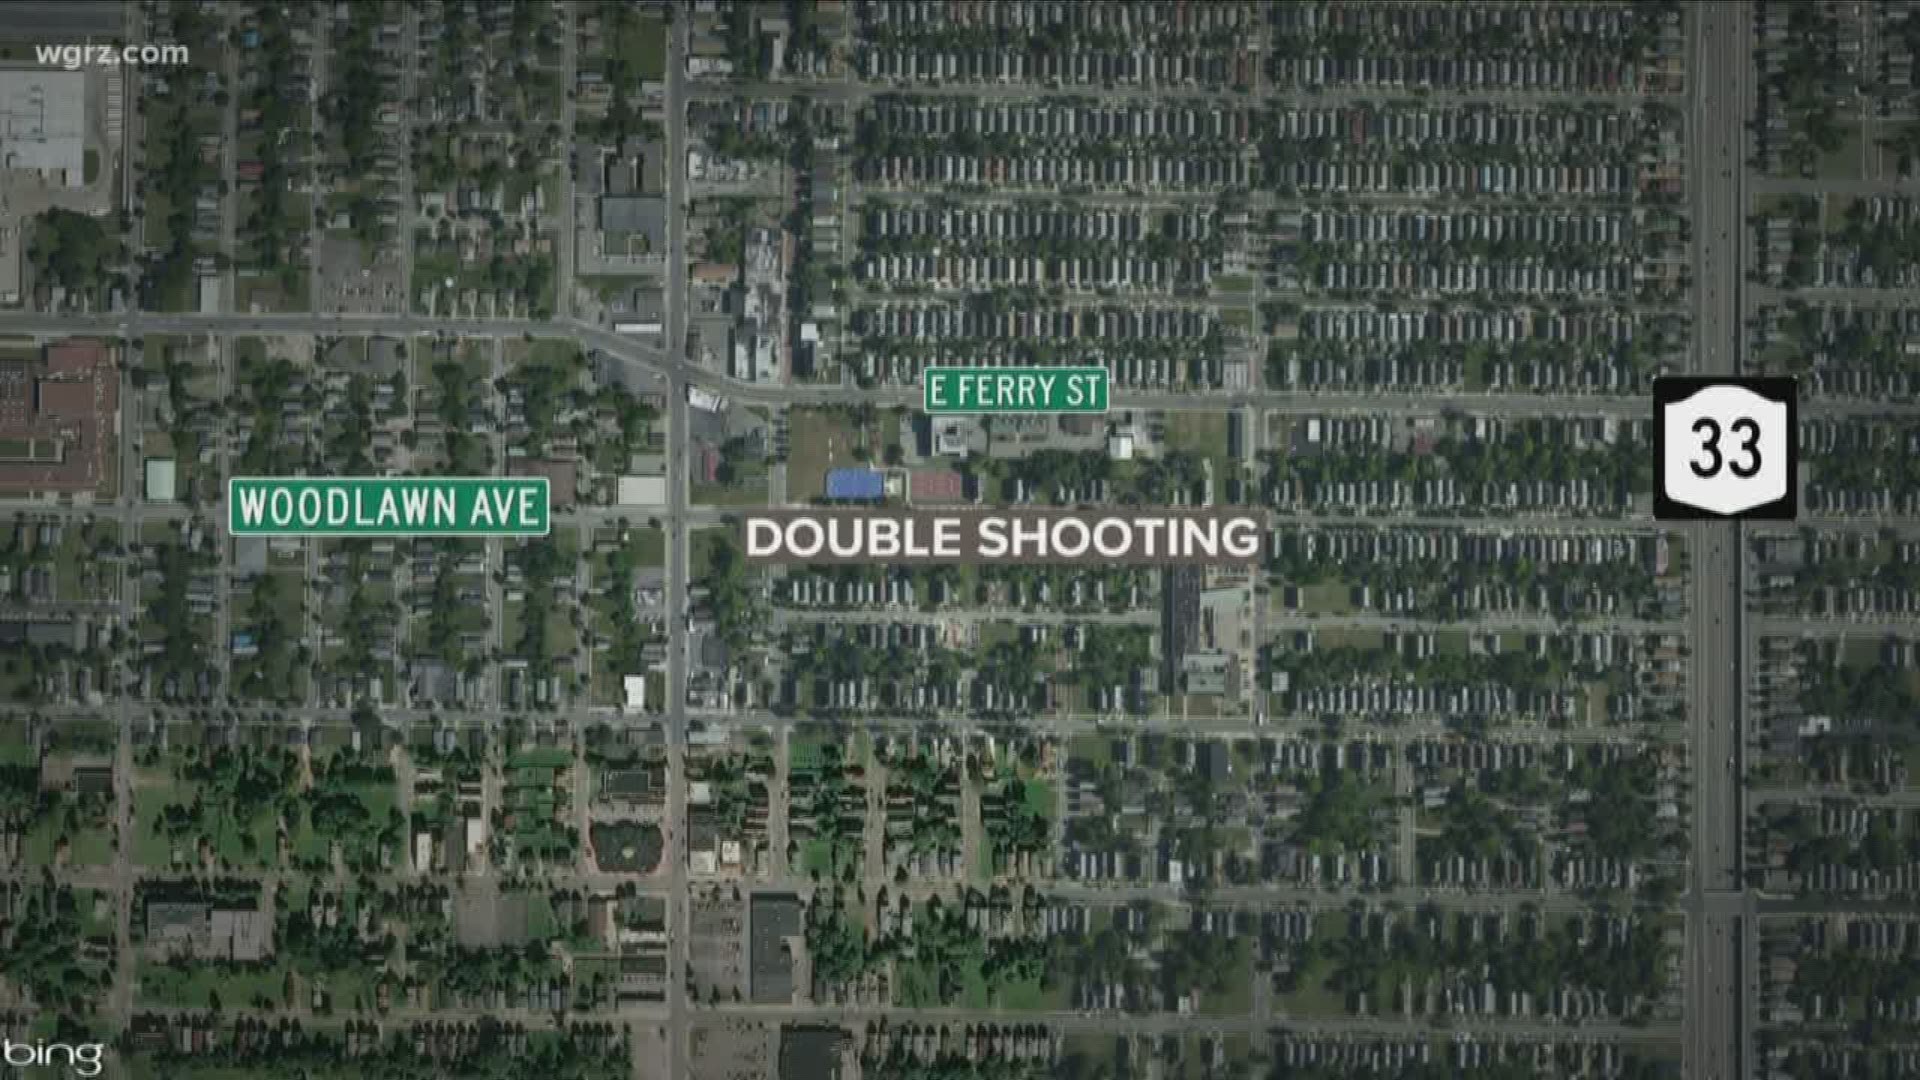 Shooting on Woodlawn Ave. leaves 2 teens critical